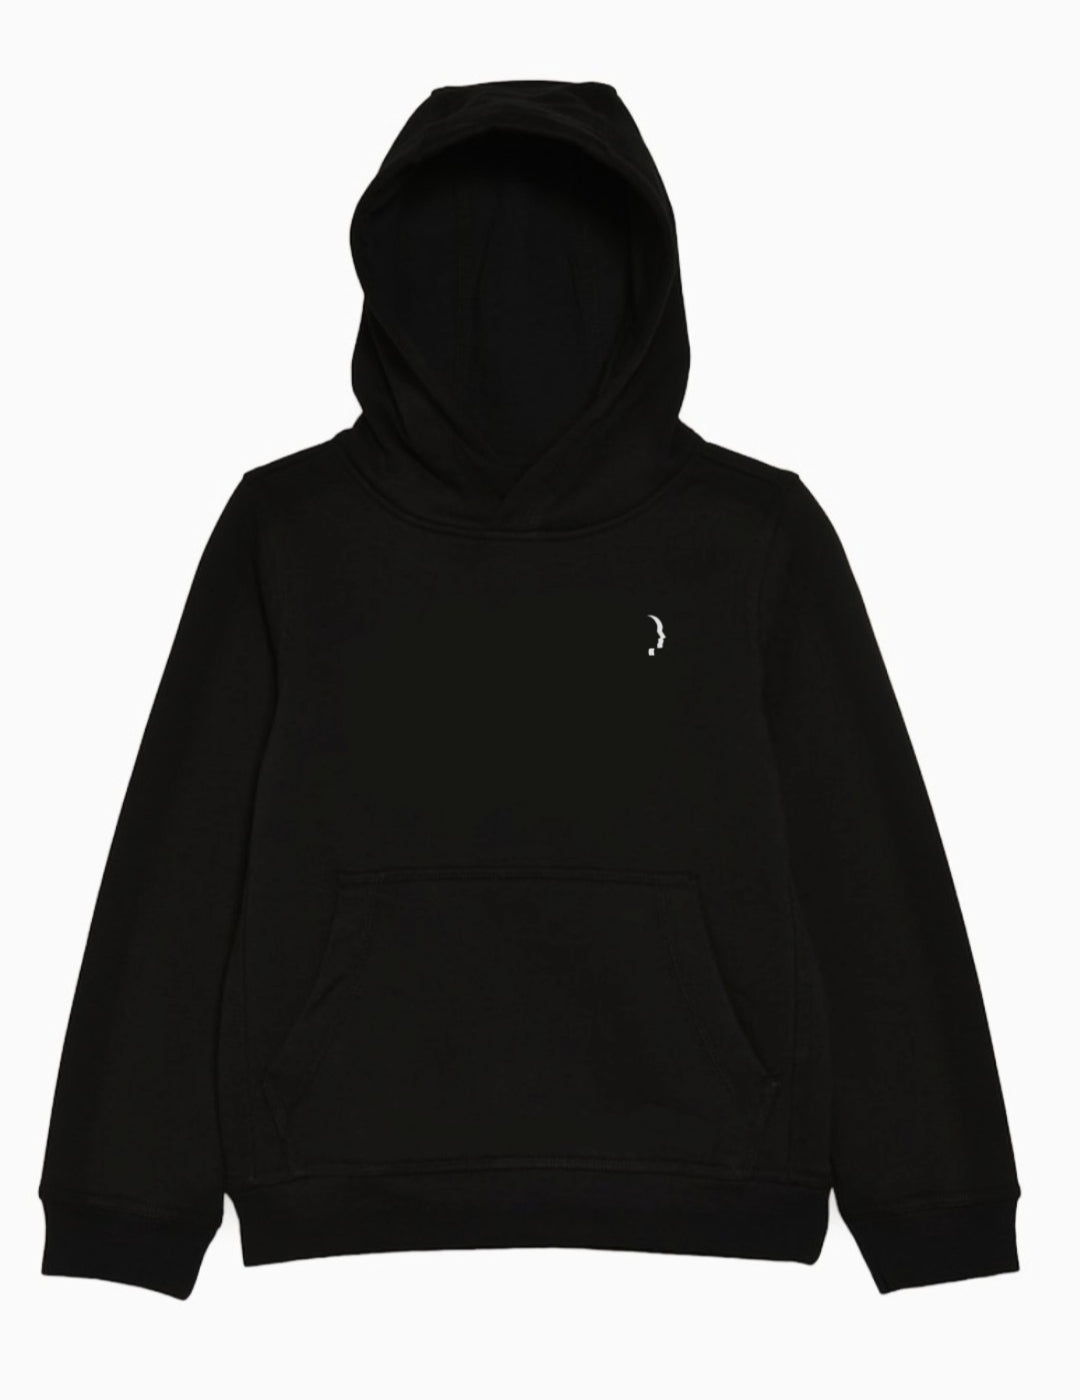 "ILLUSIONS IN MY MIND" HOODIE